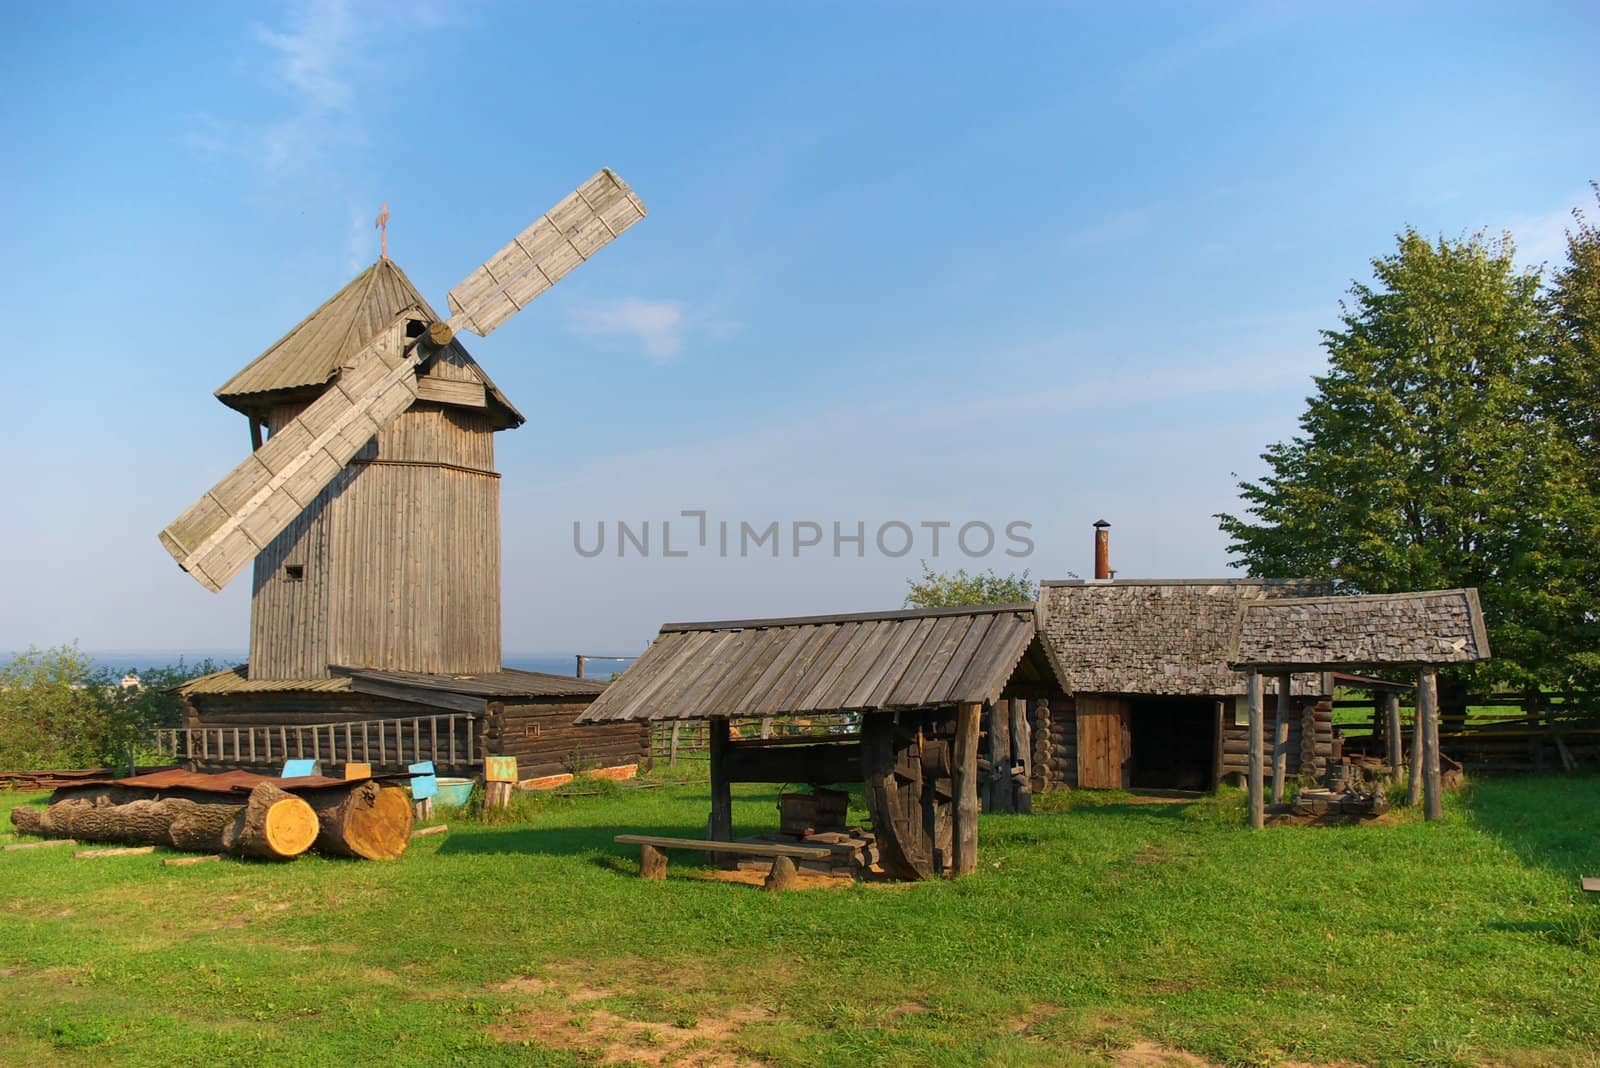 photo of the old - time wooden wind mill